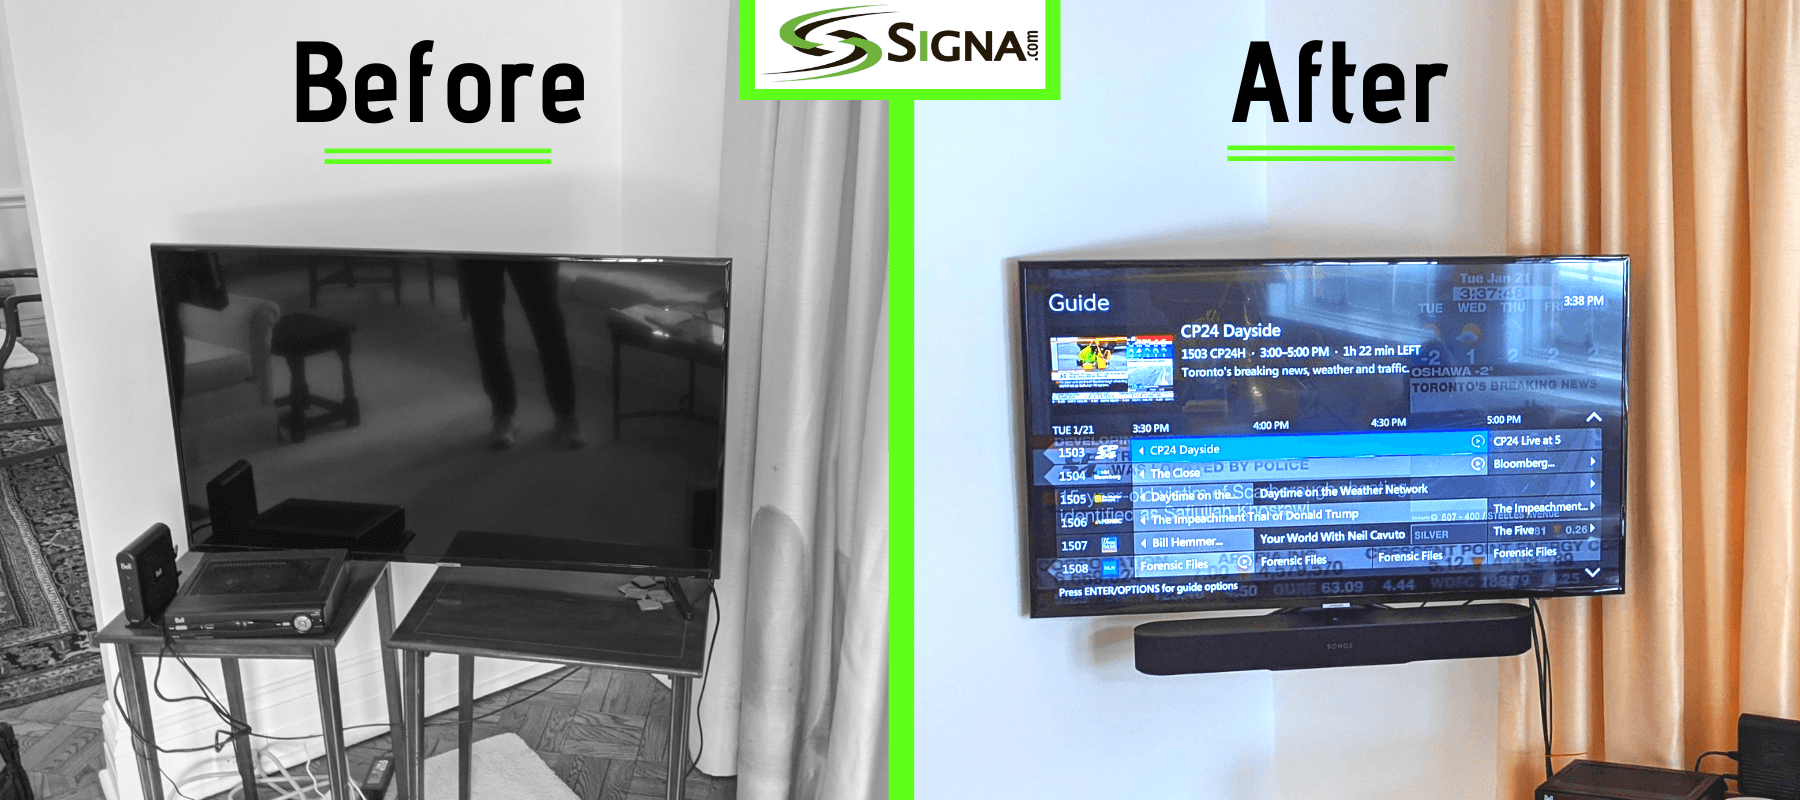 Bought Your Dream TV But Don’t Know Where To Install It? We Can Help - Signa